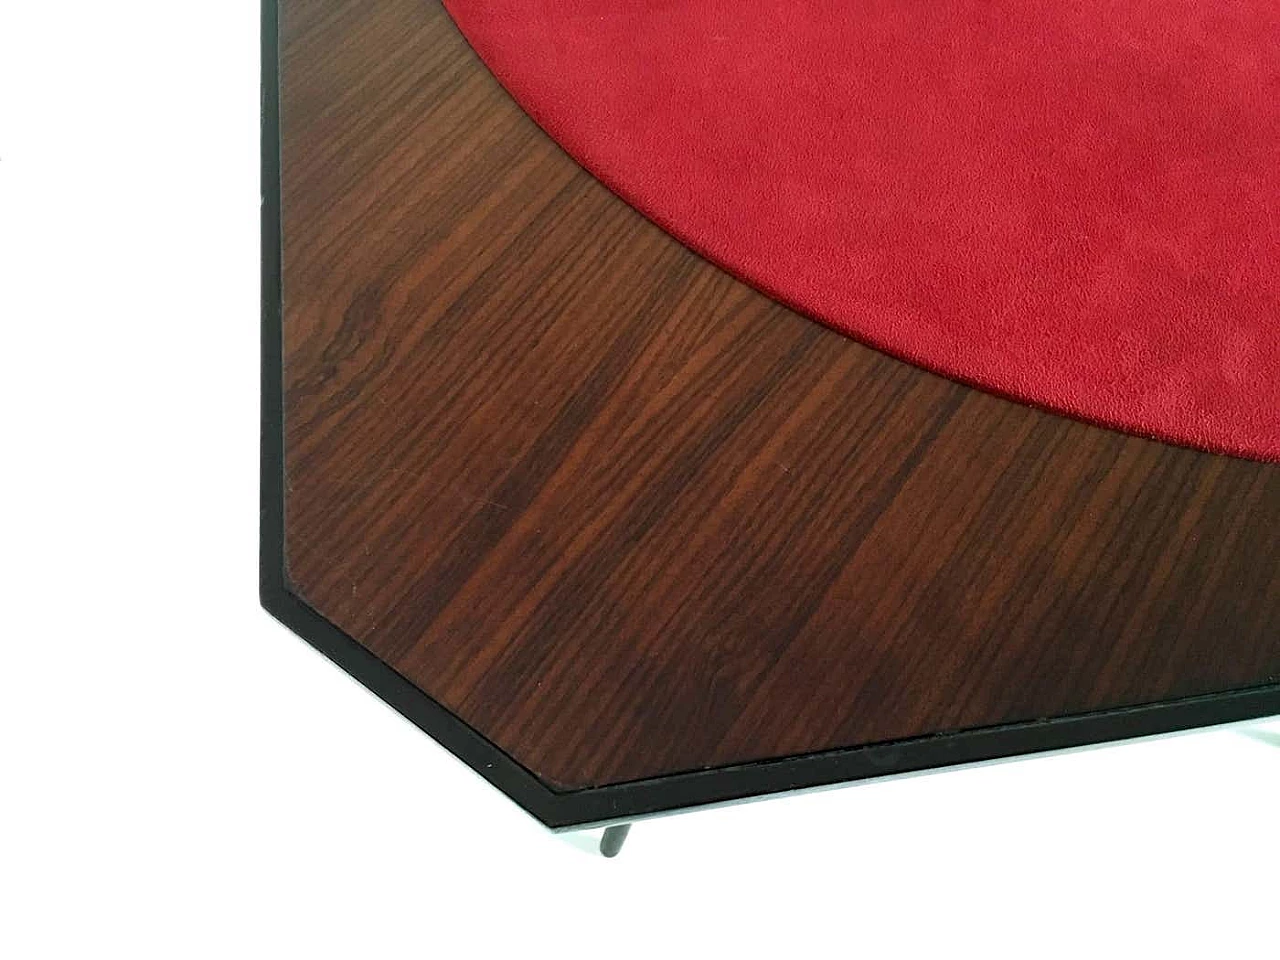 Beechwood ebonised card table with red fabric top by Chiavari, 1950s 2